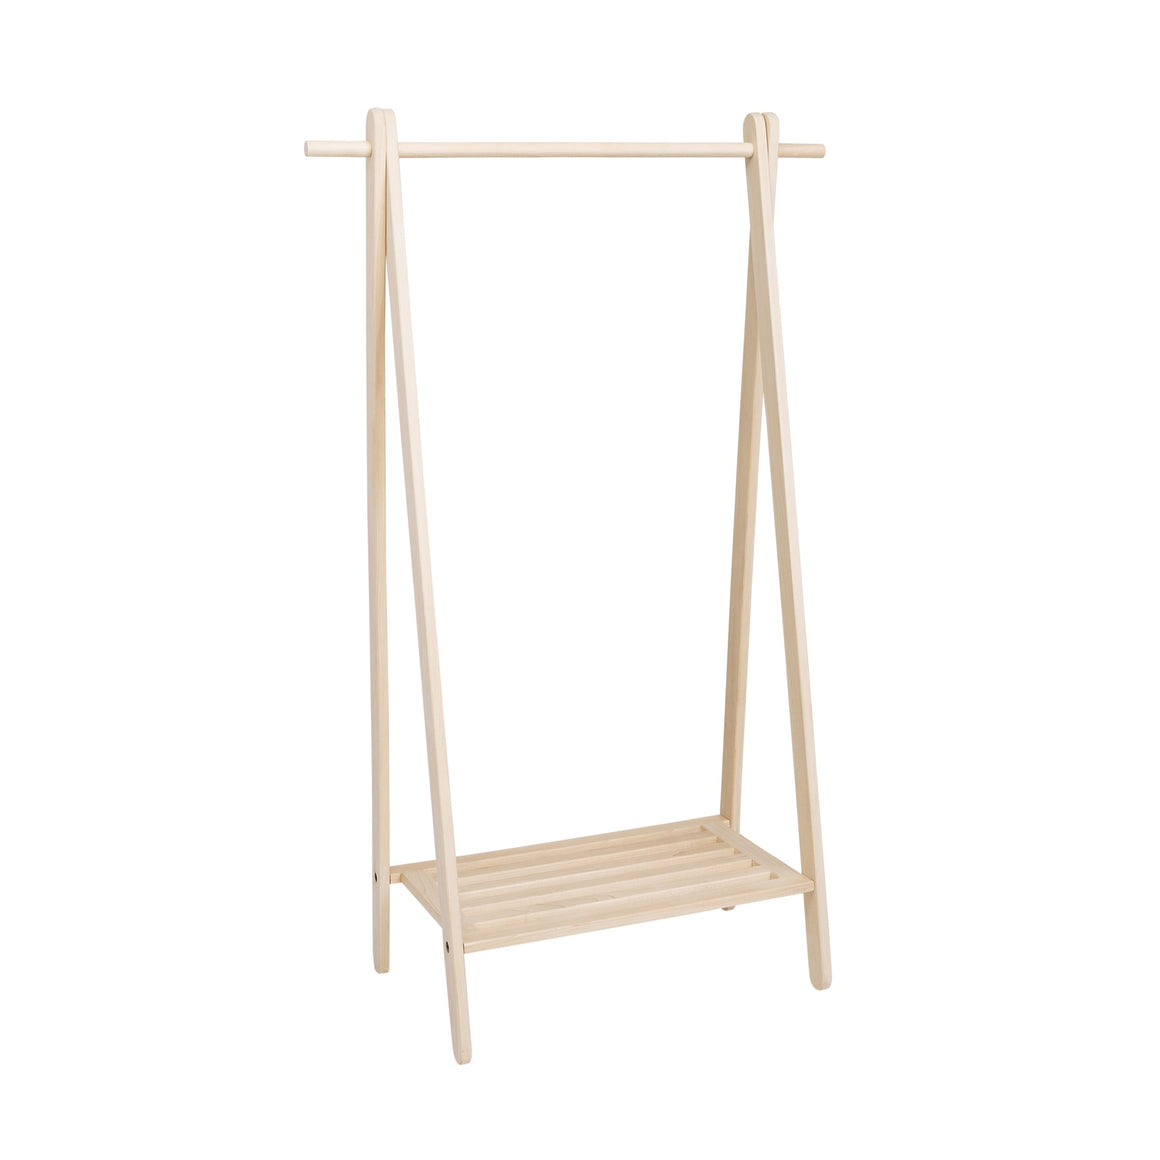 Pennsylvania Woodworks Maple Garment Rack, Large, Clothing Space, Efficient, Heavy Duty, Easy Assembly, Made in USA - Pennsylvania Woodworks